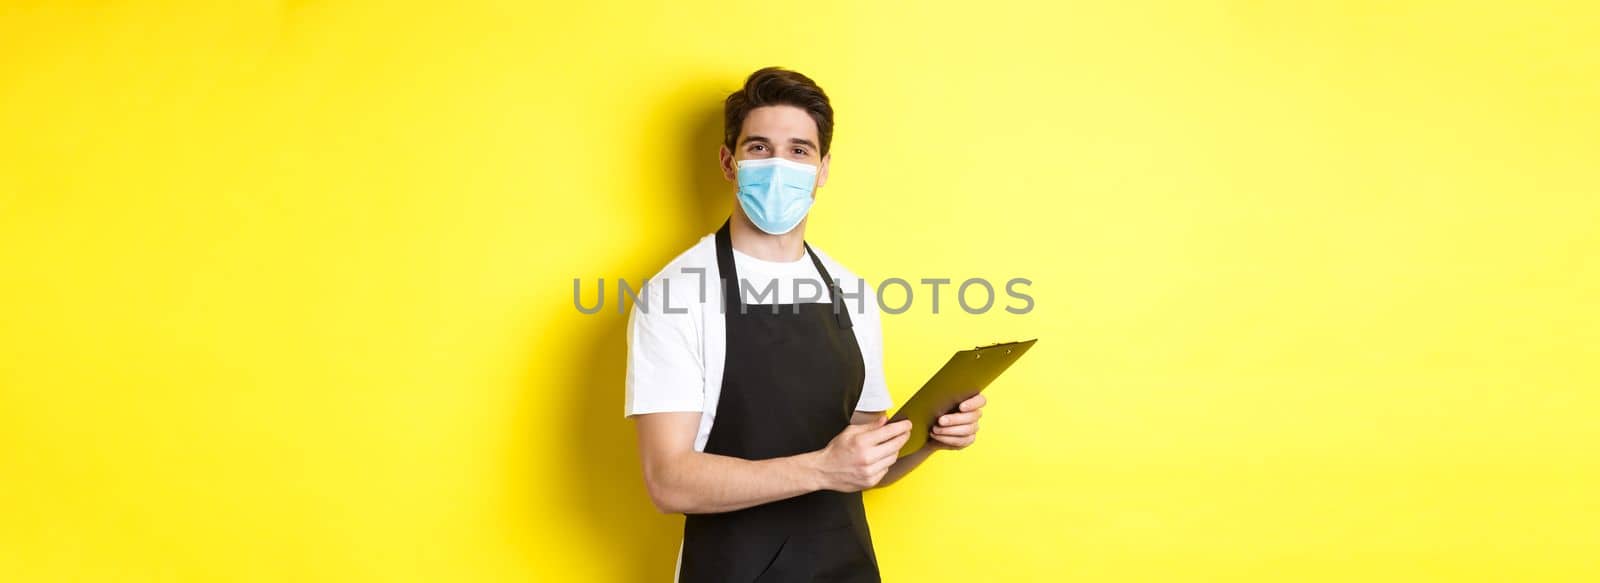 Concept of covid-19, small business and quarantine. Young male seller in medical mask and black apron taking orders, holding clipboard, standing over yellow background.